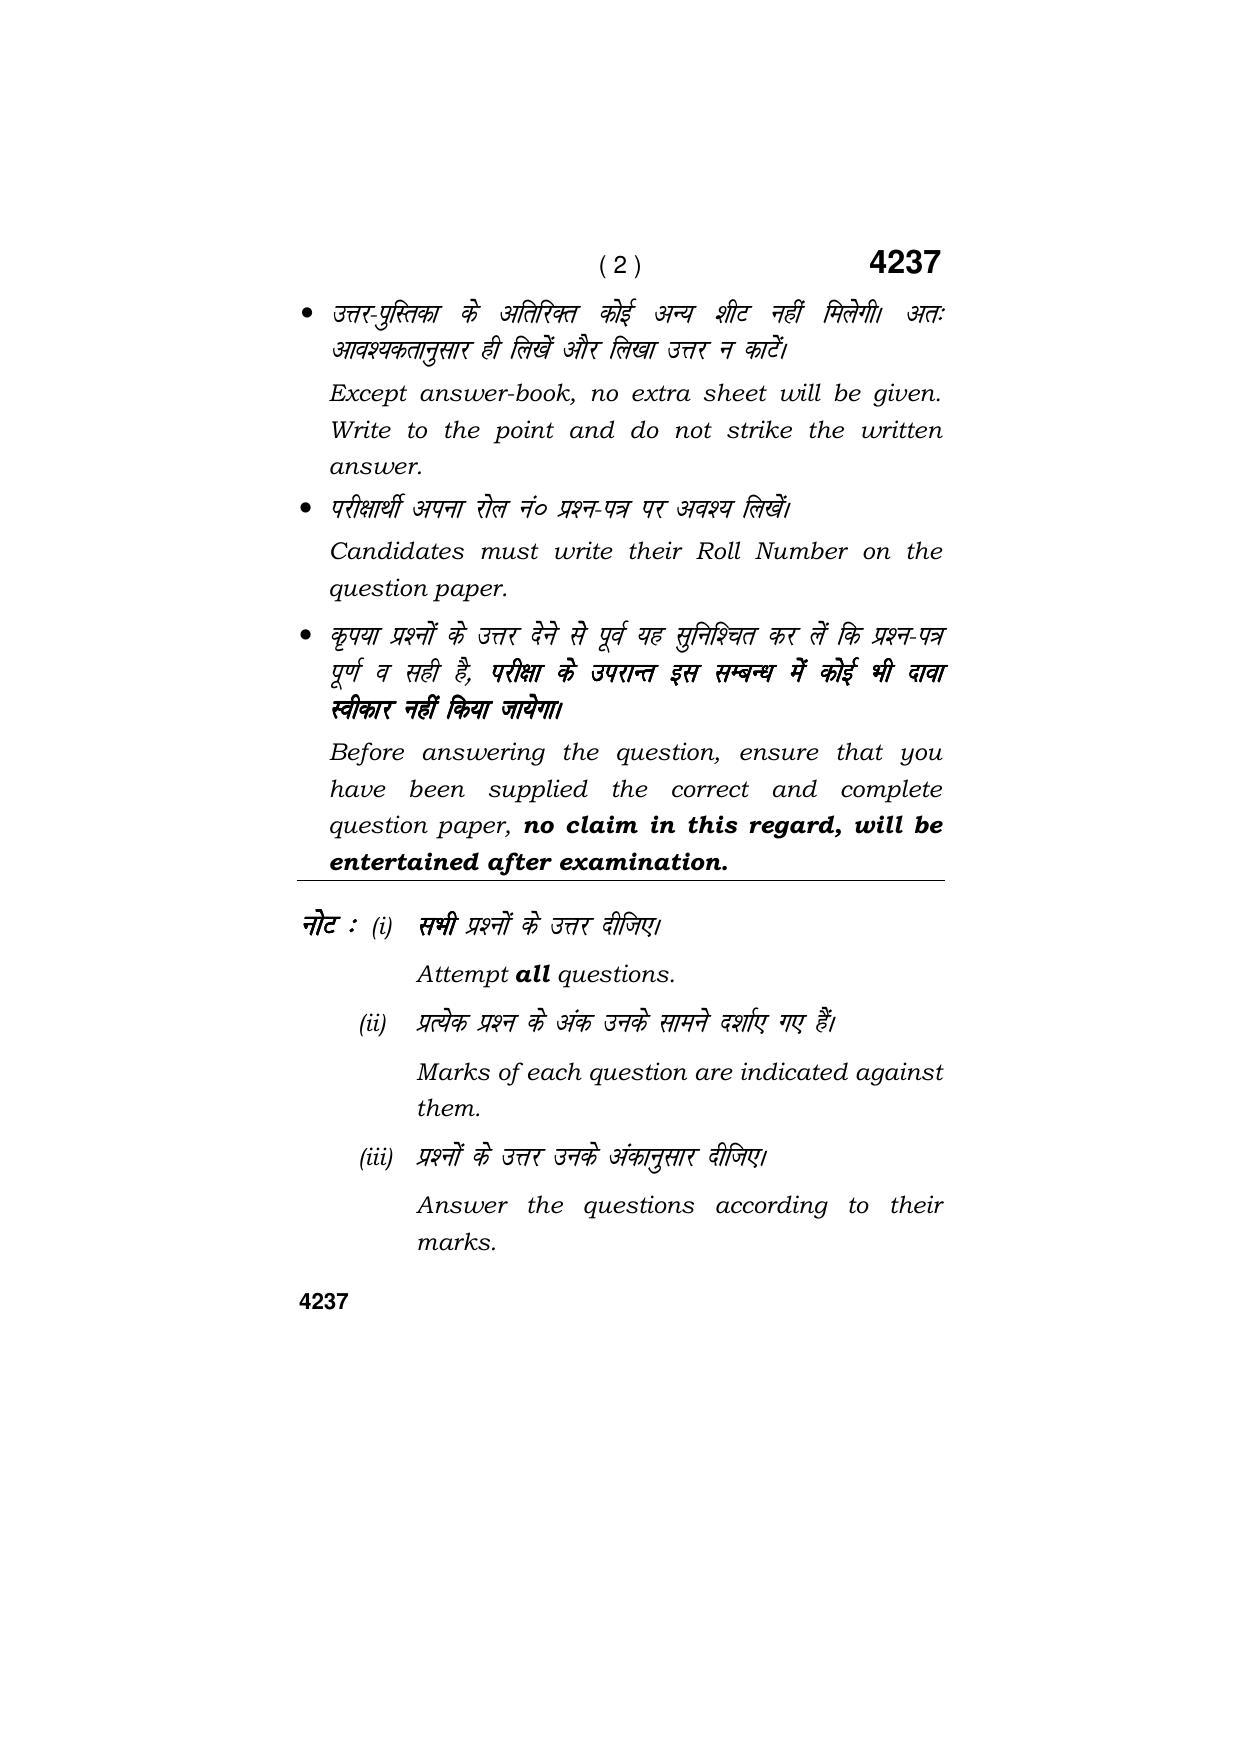 Haryana Board HBSE Class 10 Vision Technician 2019 Question Paper - Page 2